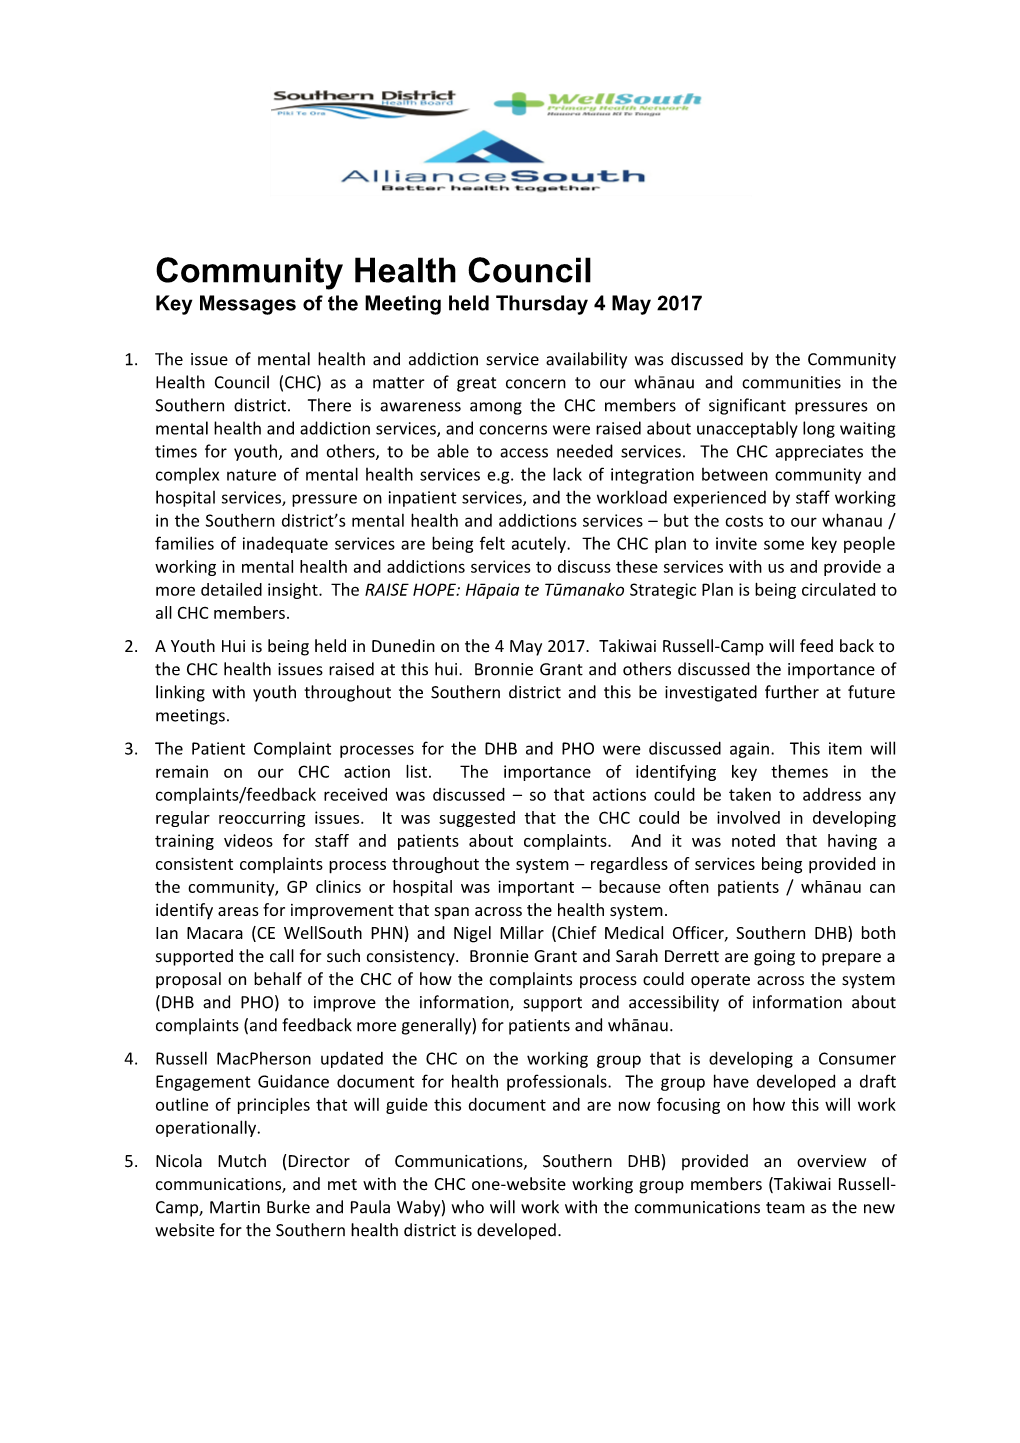 Community Health Council Key Messagesof the Meeting Heldthursday 4 May 2017